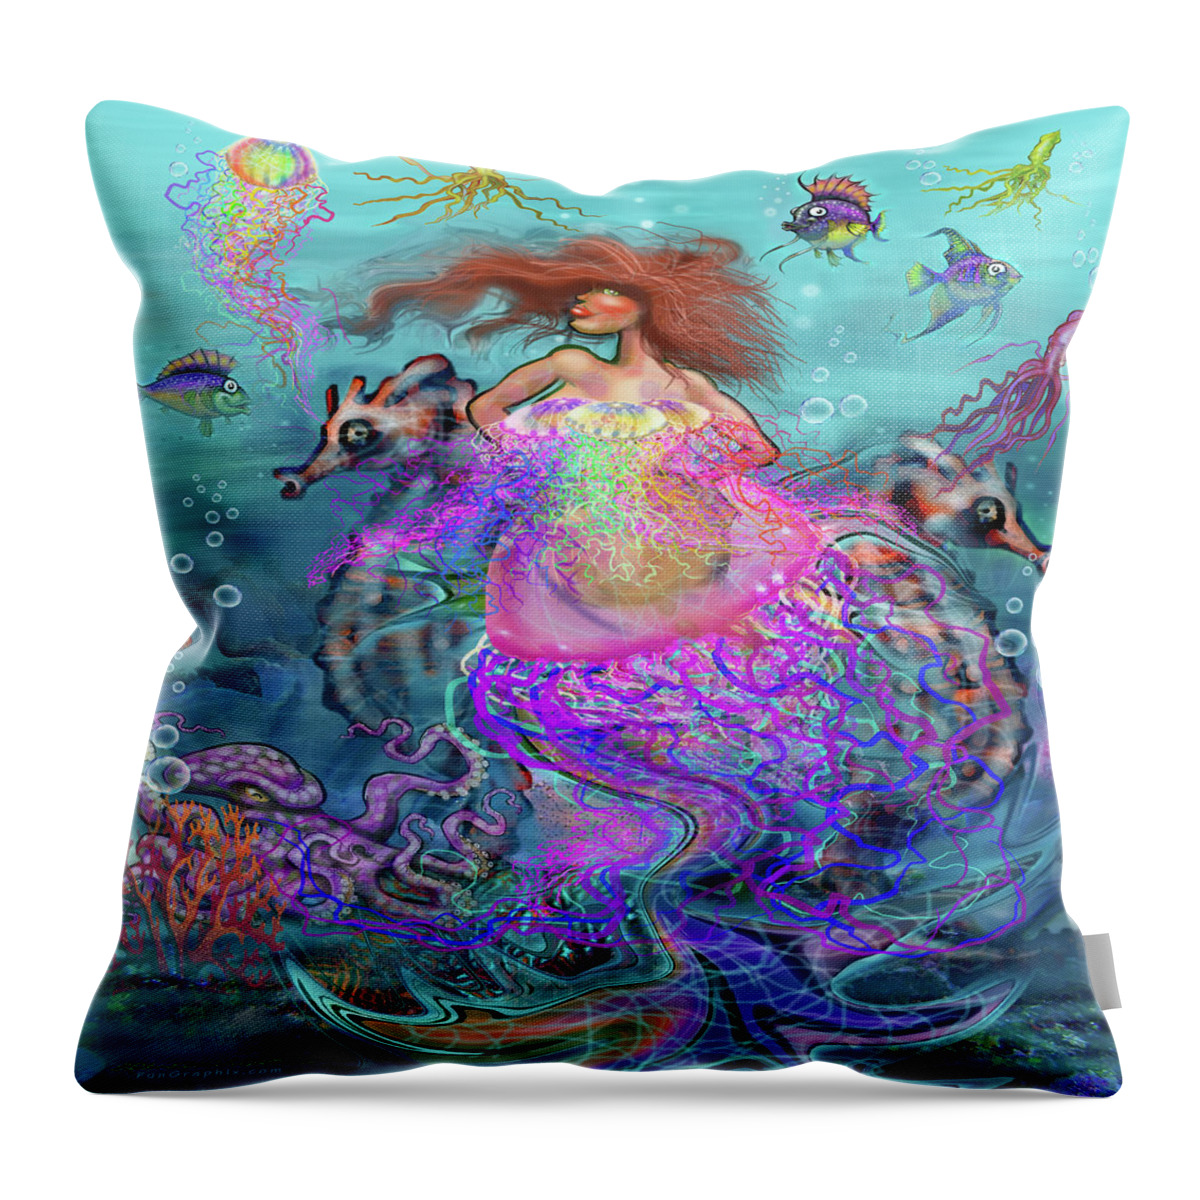 Mermaid Throw Pillow featuring the digital art Mermaid Jellyfish Dress #1 by Kevin Middleton